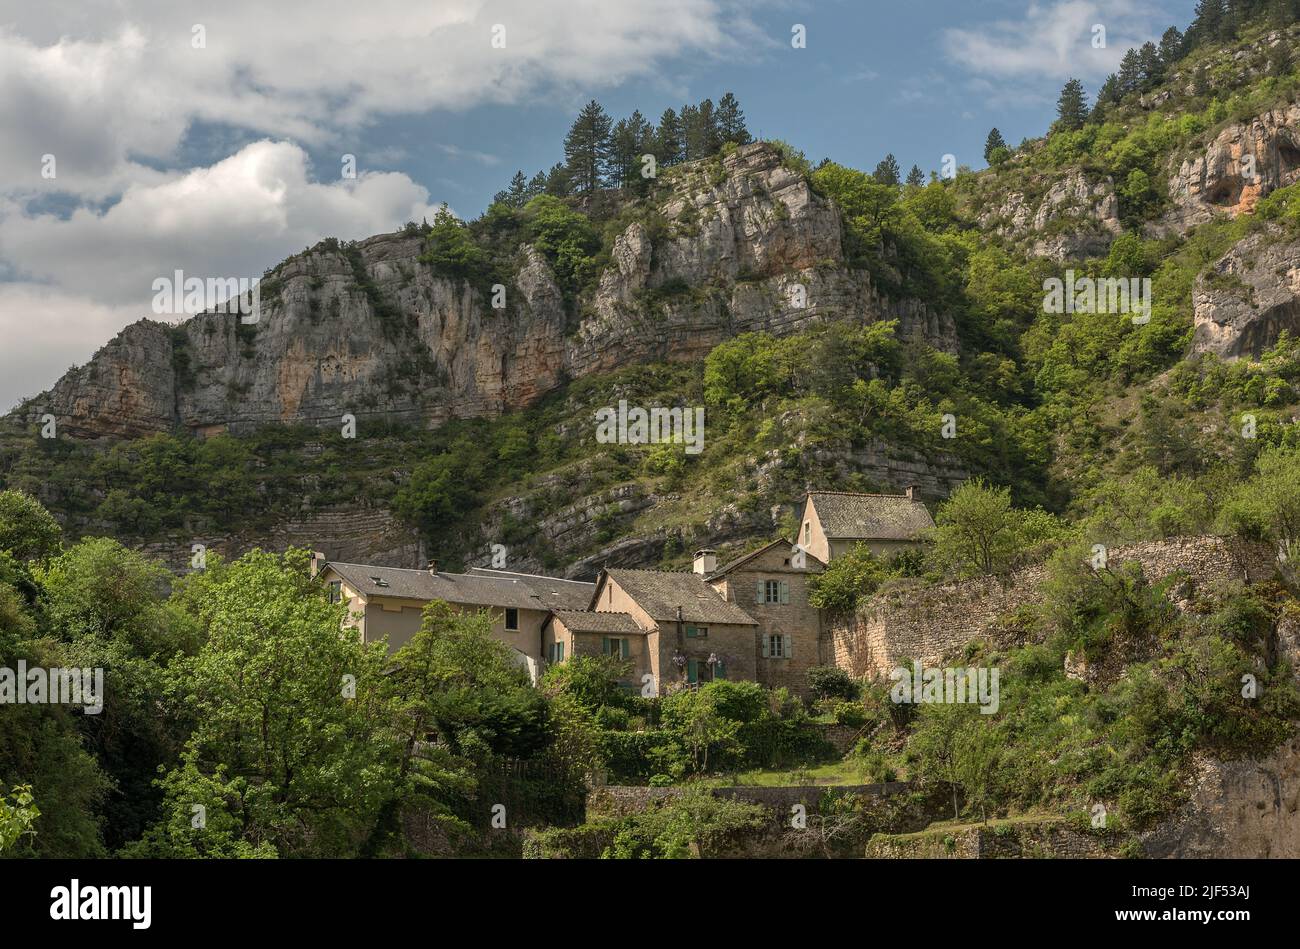 Historical buildings in the commune of Sainte-Enimie, Gorges du Tarn Causses, Occitania, France Stock Photo